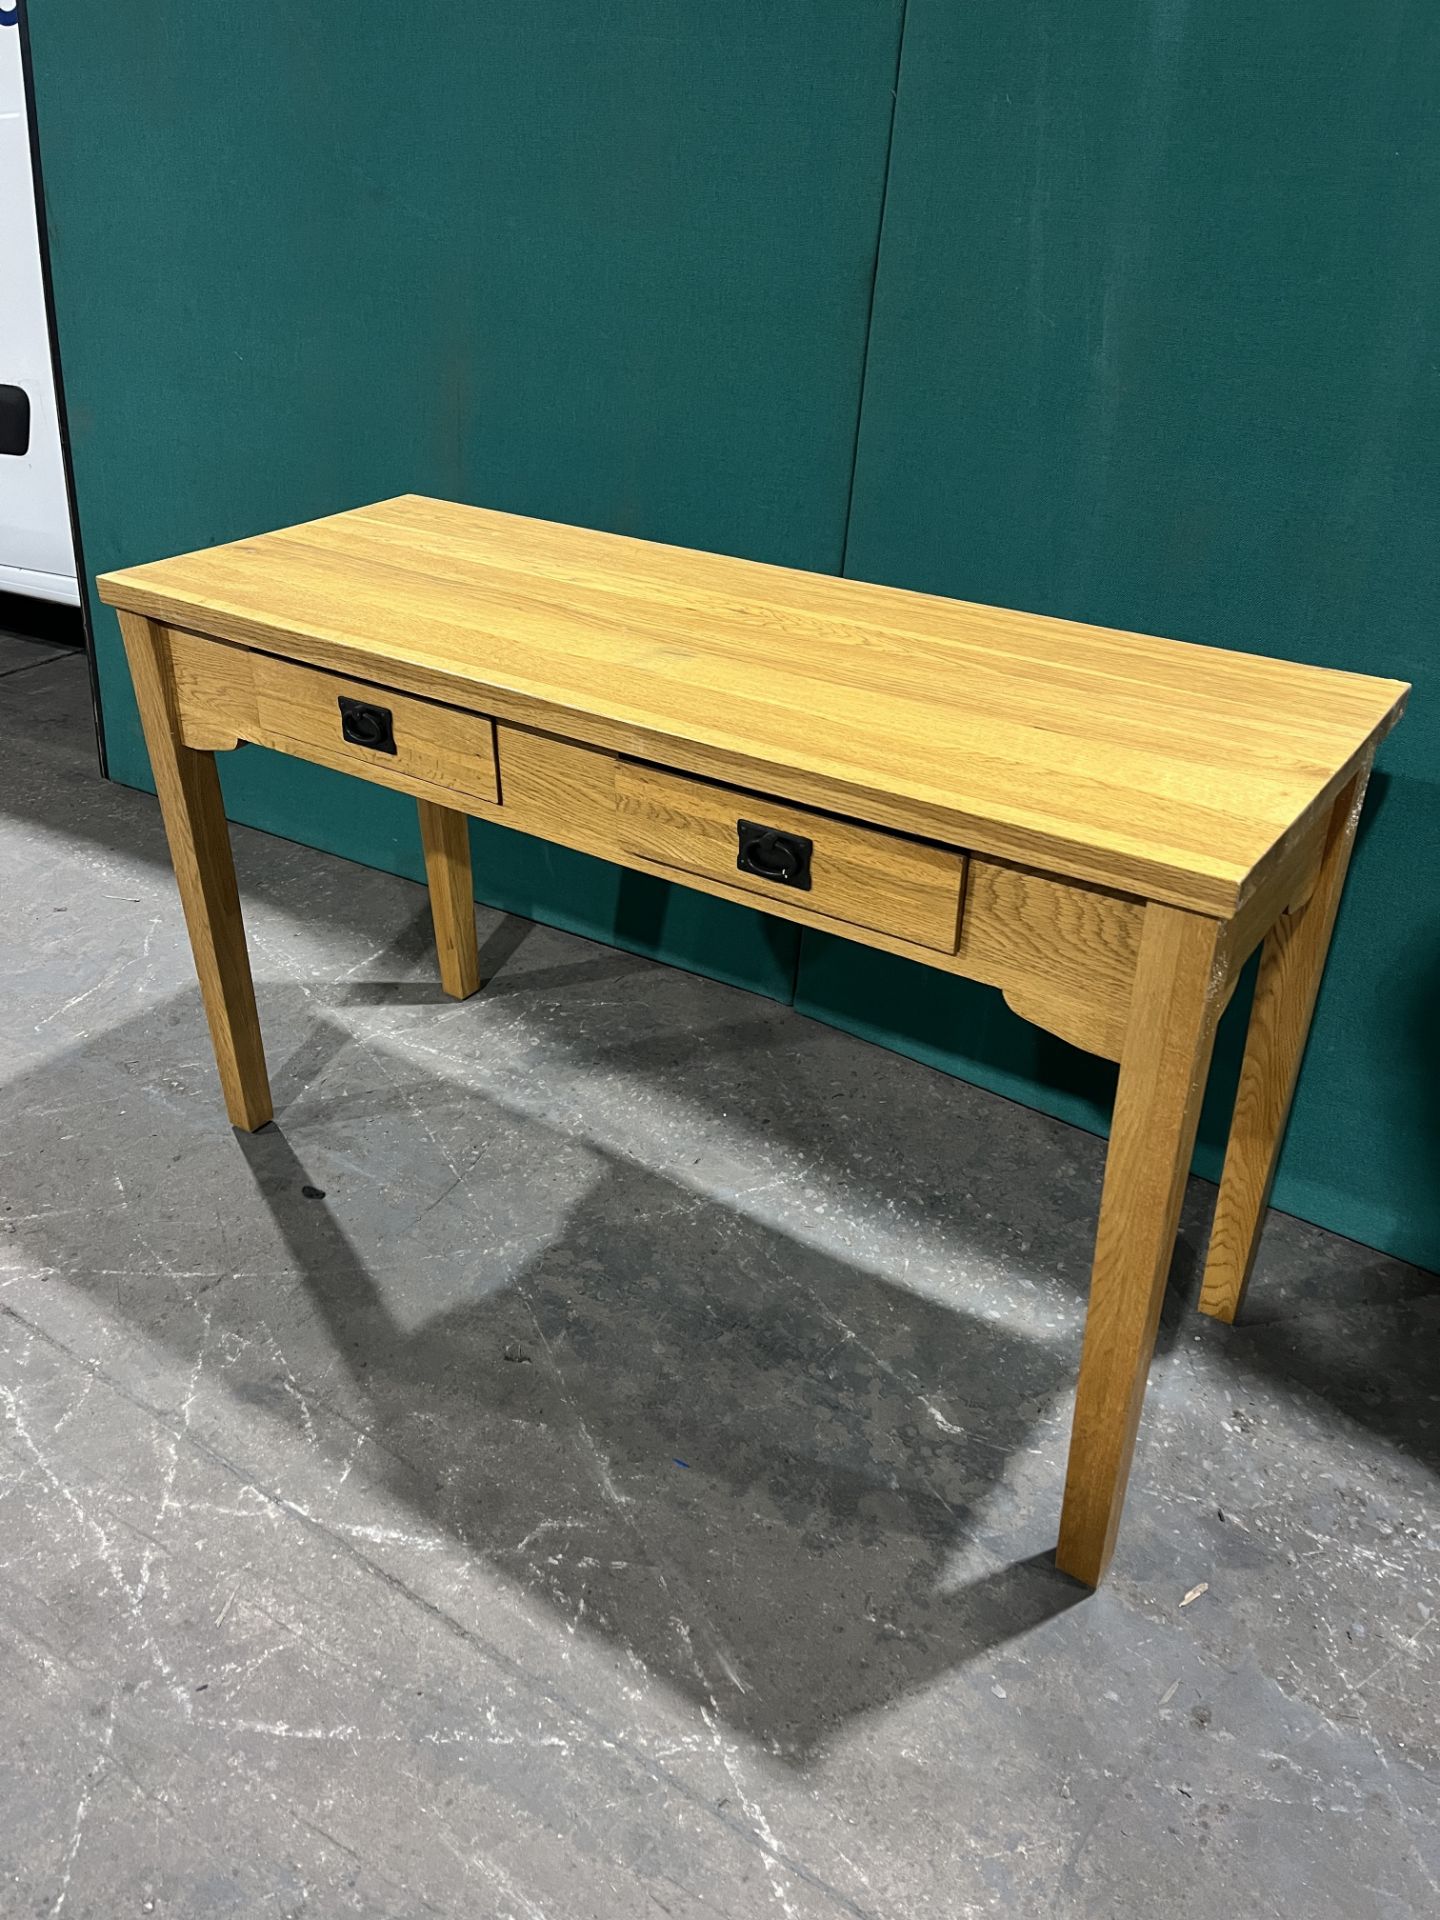 Oak Console Table w 2 Drawers - Image 2 of 4